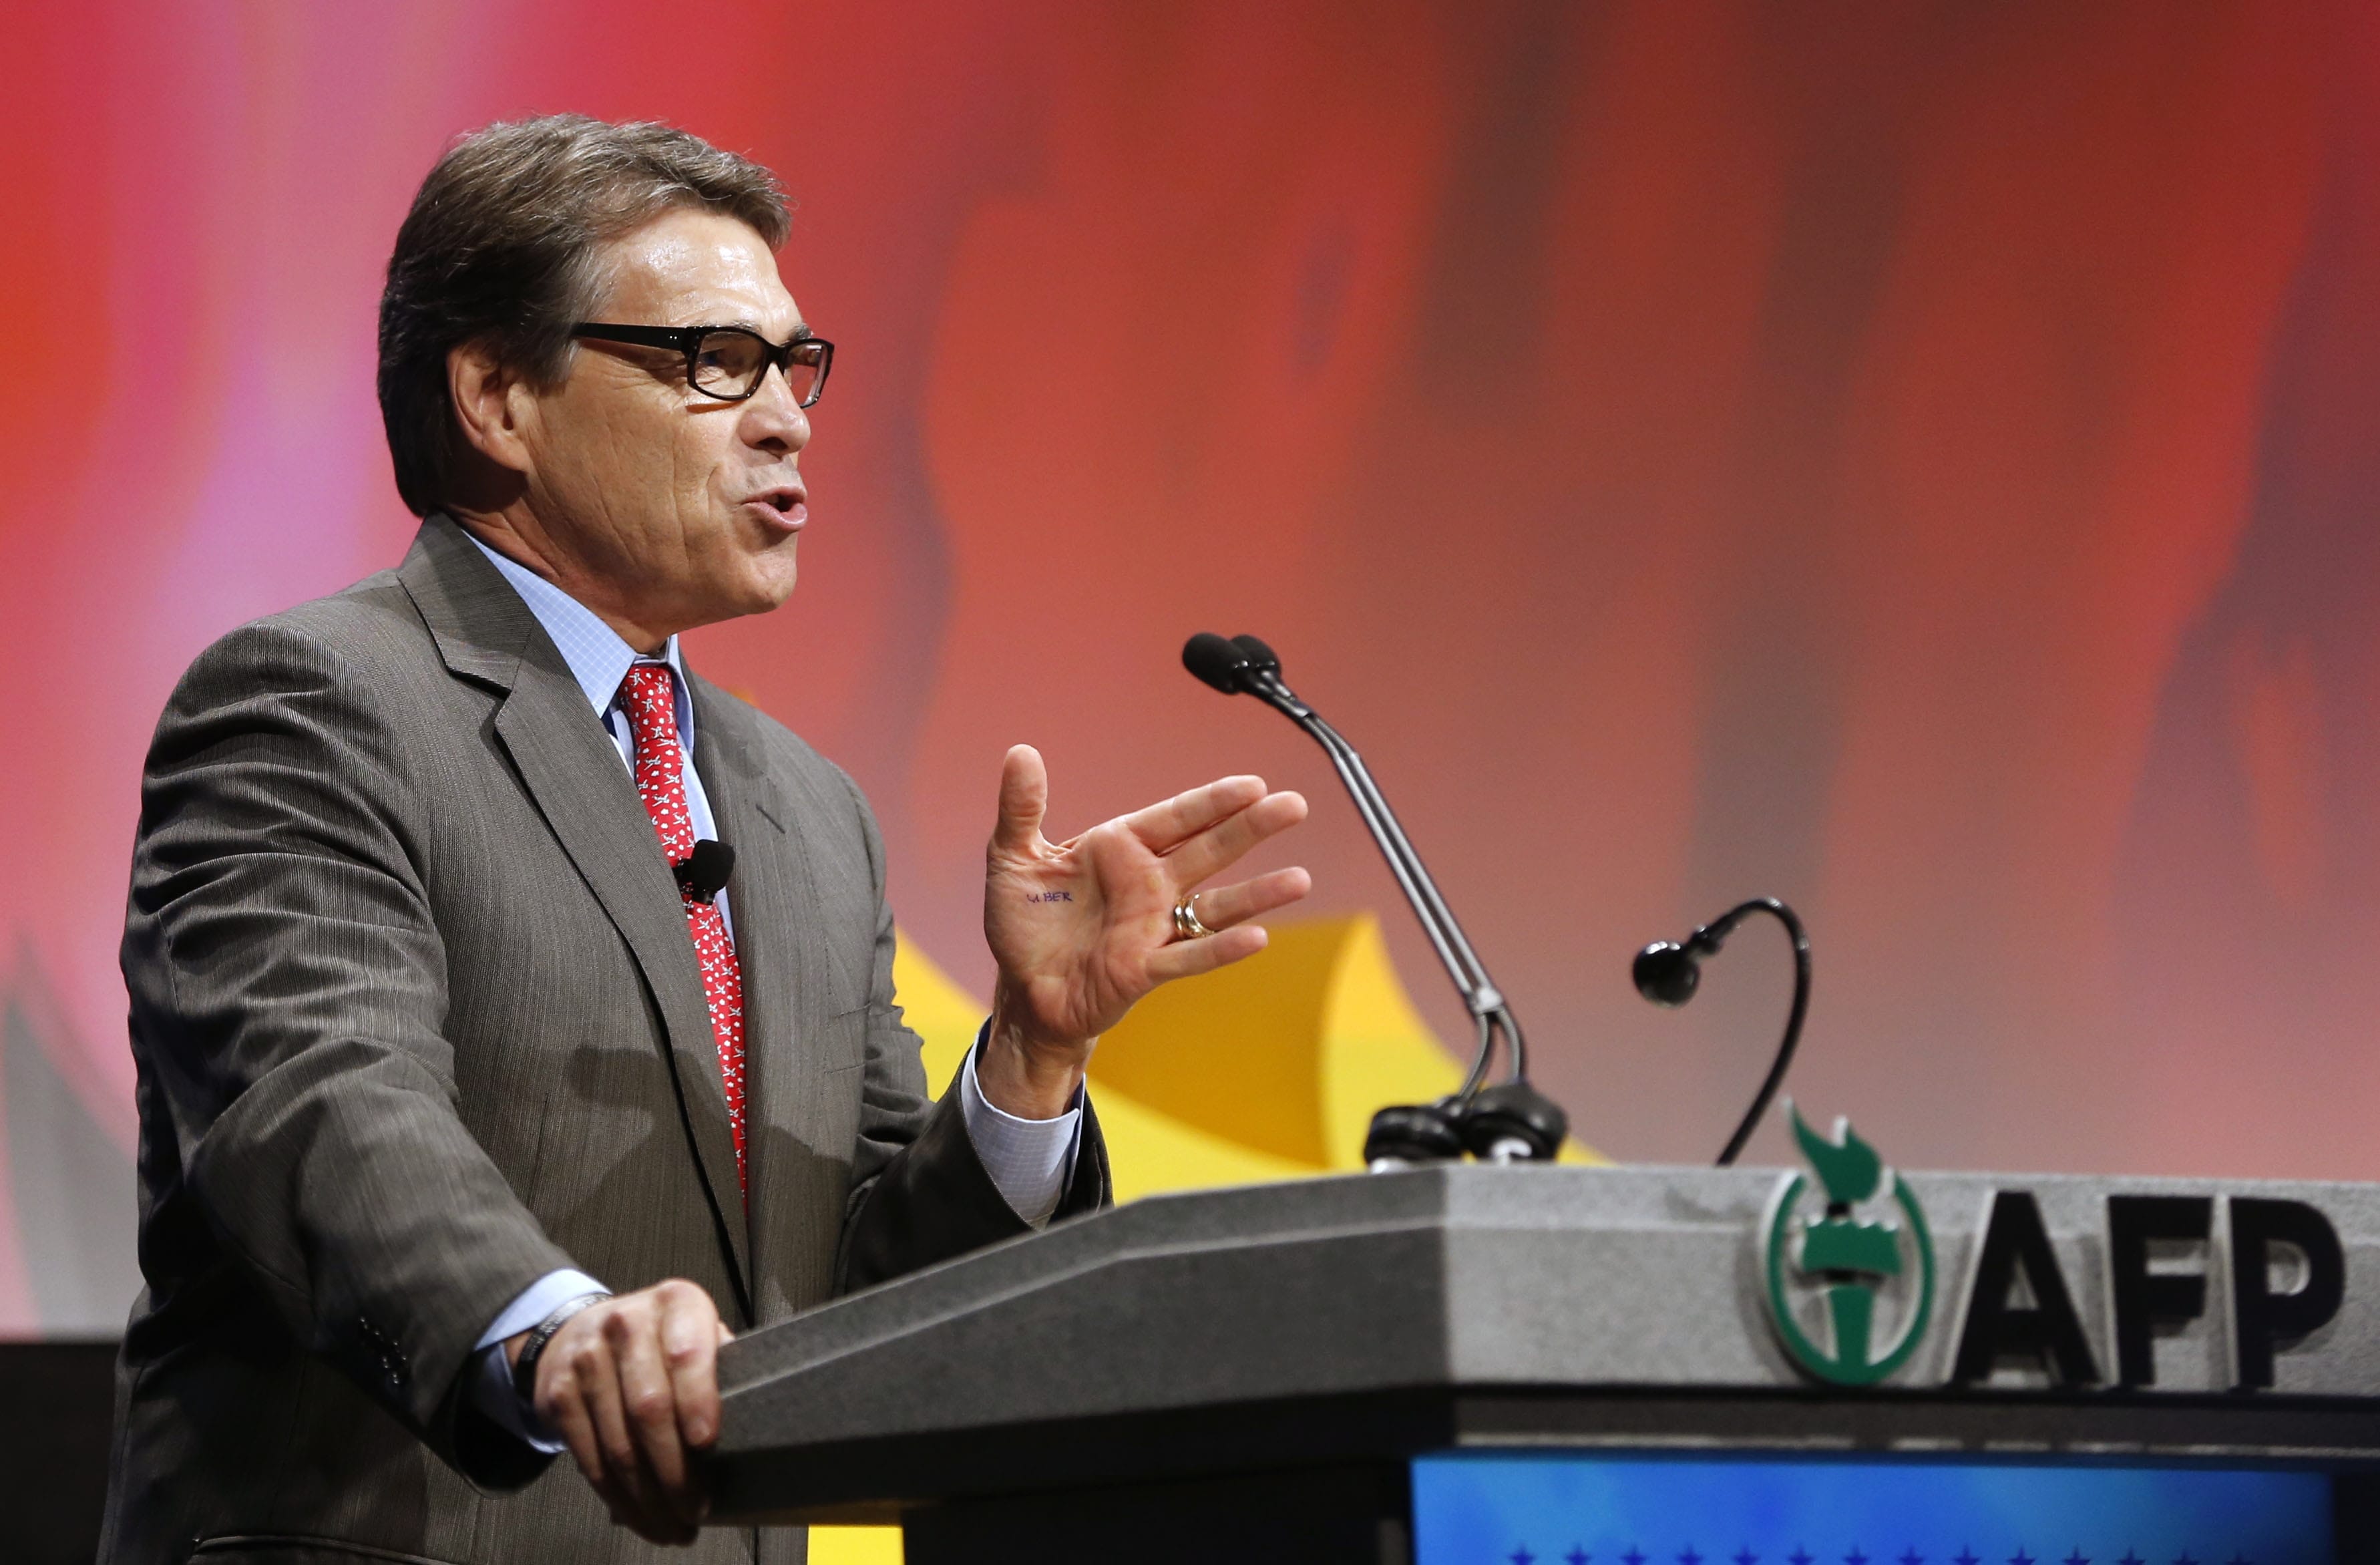 Governor Rick Perry with the word &quot;uber&quot; written on his hand as he speaks at the Americans for Prosperity conference at the Omni Dallas Hotel in Dallas, Texas on Friday.